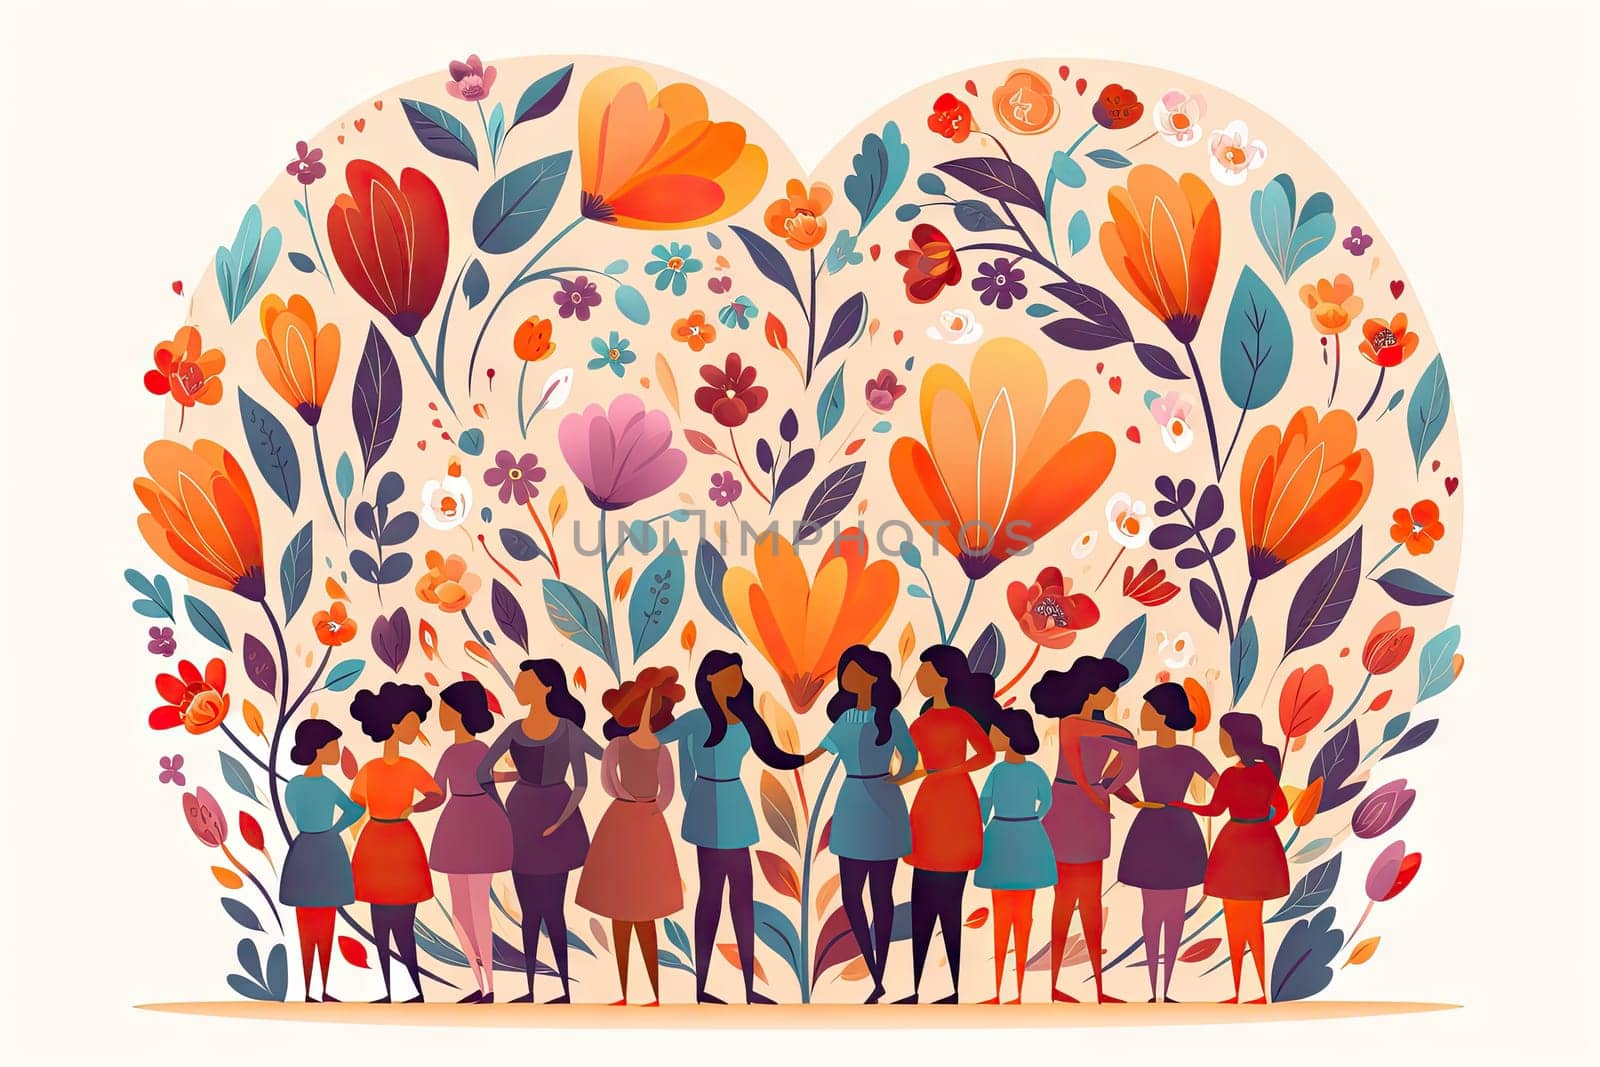 women day many women come together to support each other illustration image.by Generative AI.